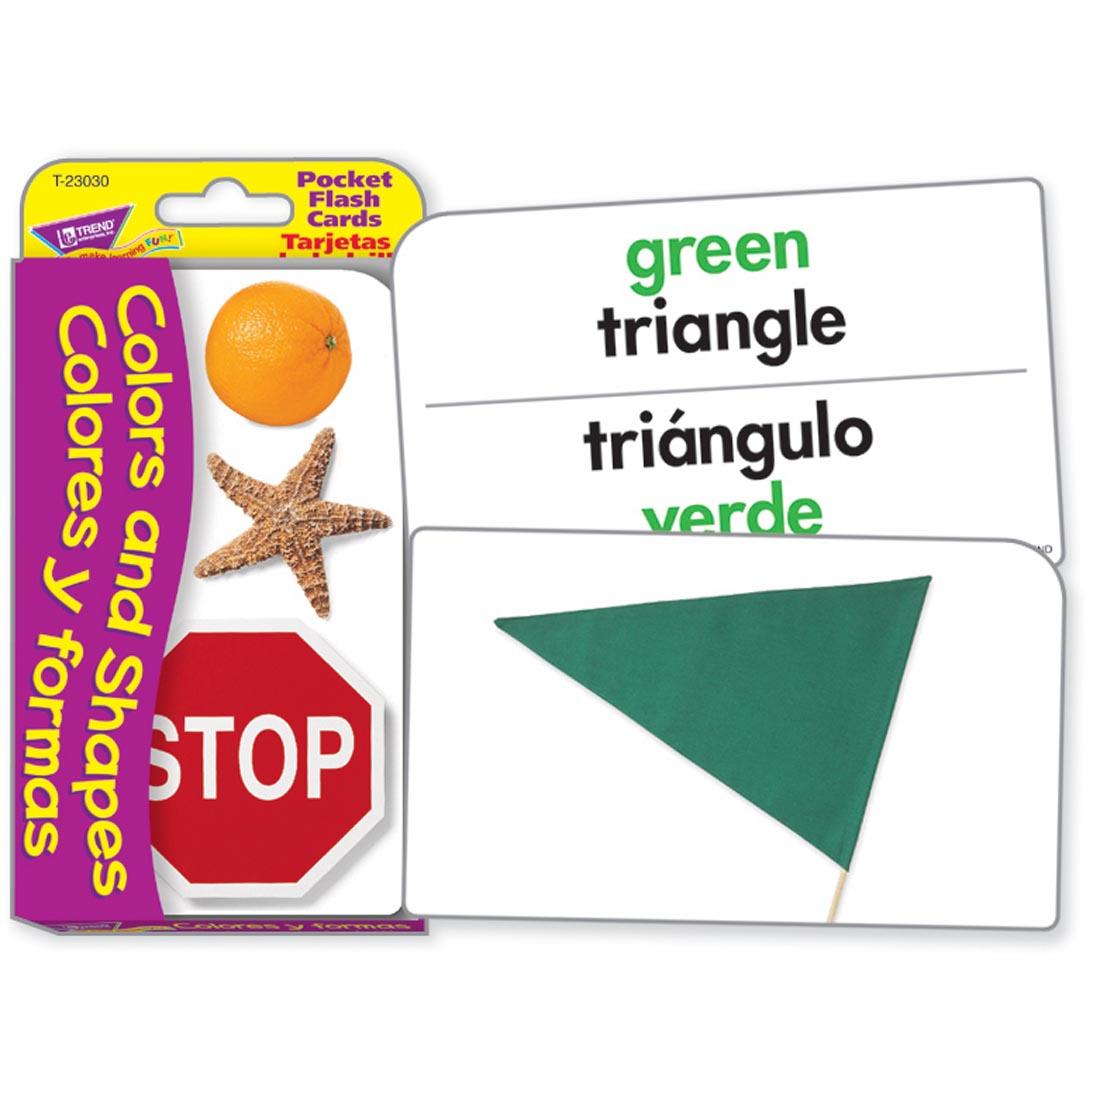 TREND Colors and Shapes/Colores y Formas Pocket Flash Cards